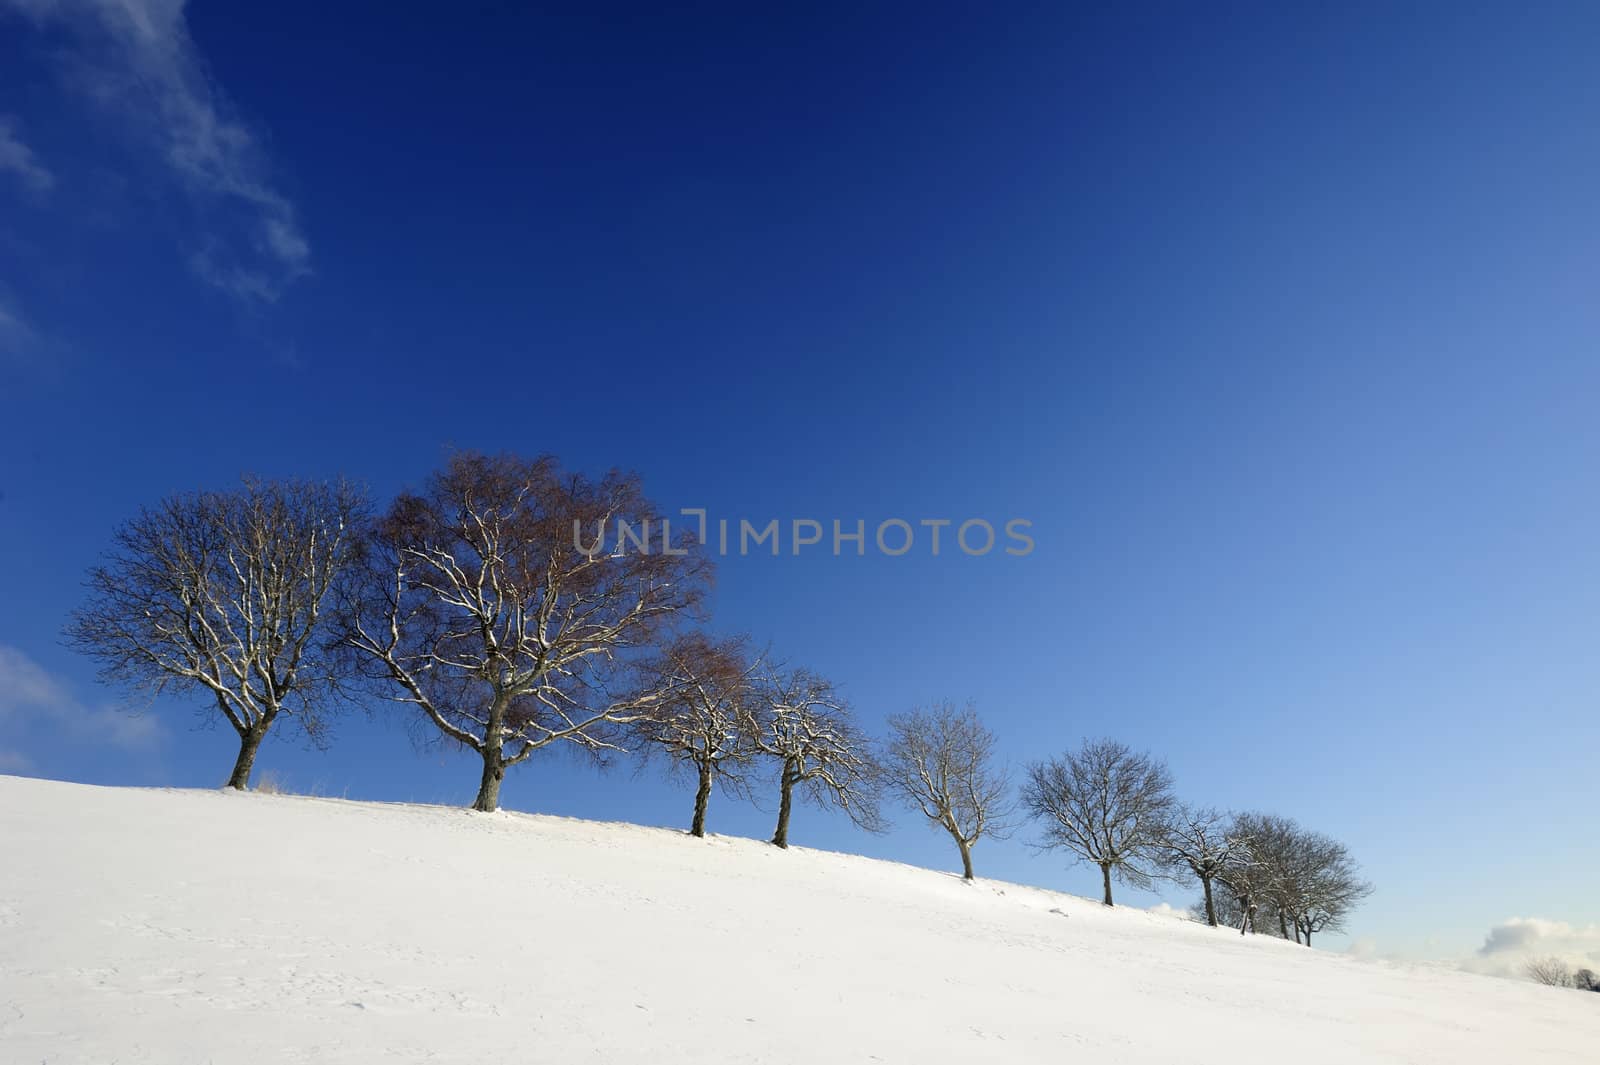 A line of trees in a snowy winter landscape. Space for text in the sky.